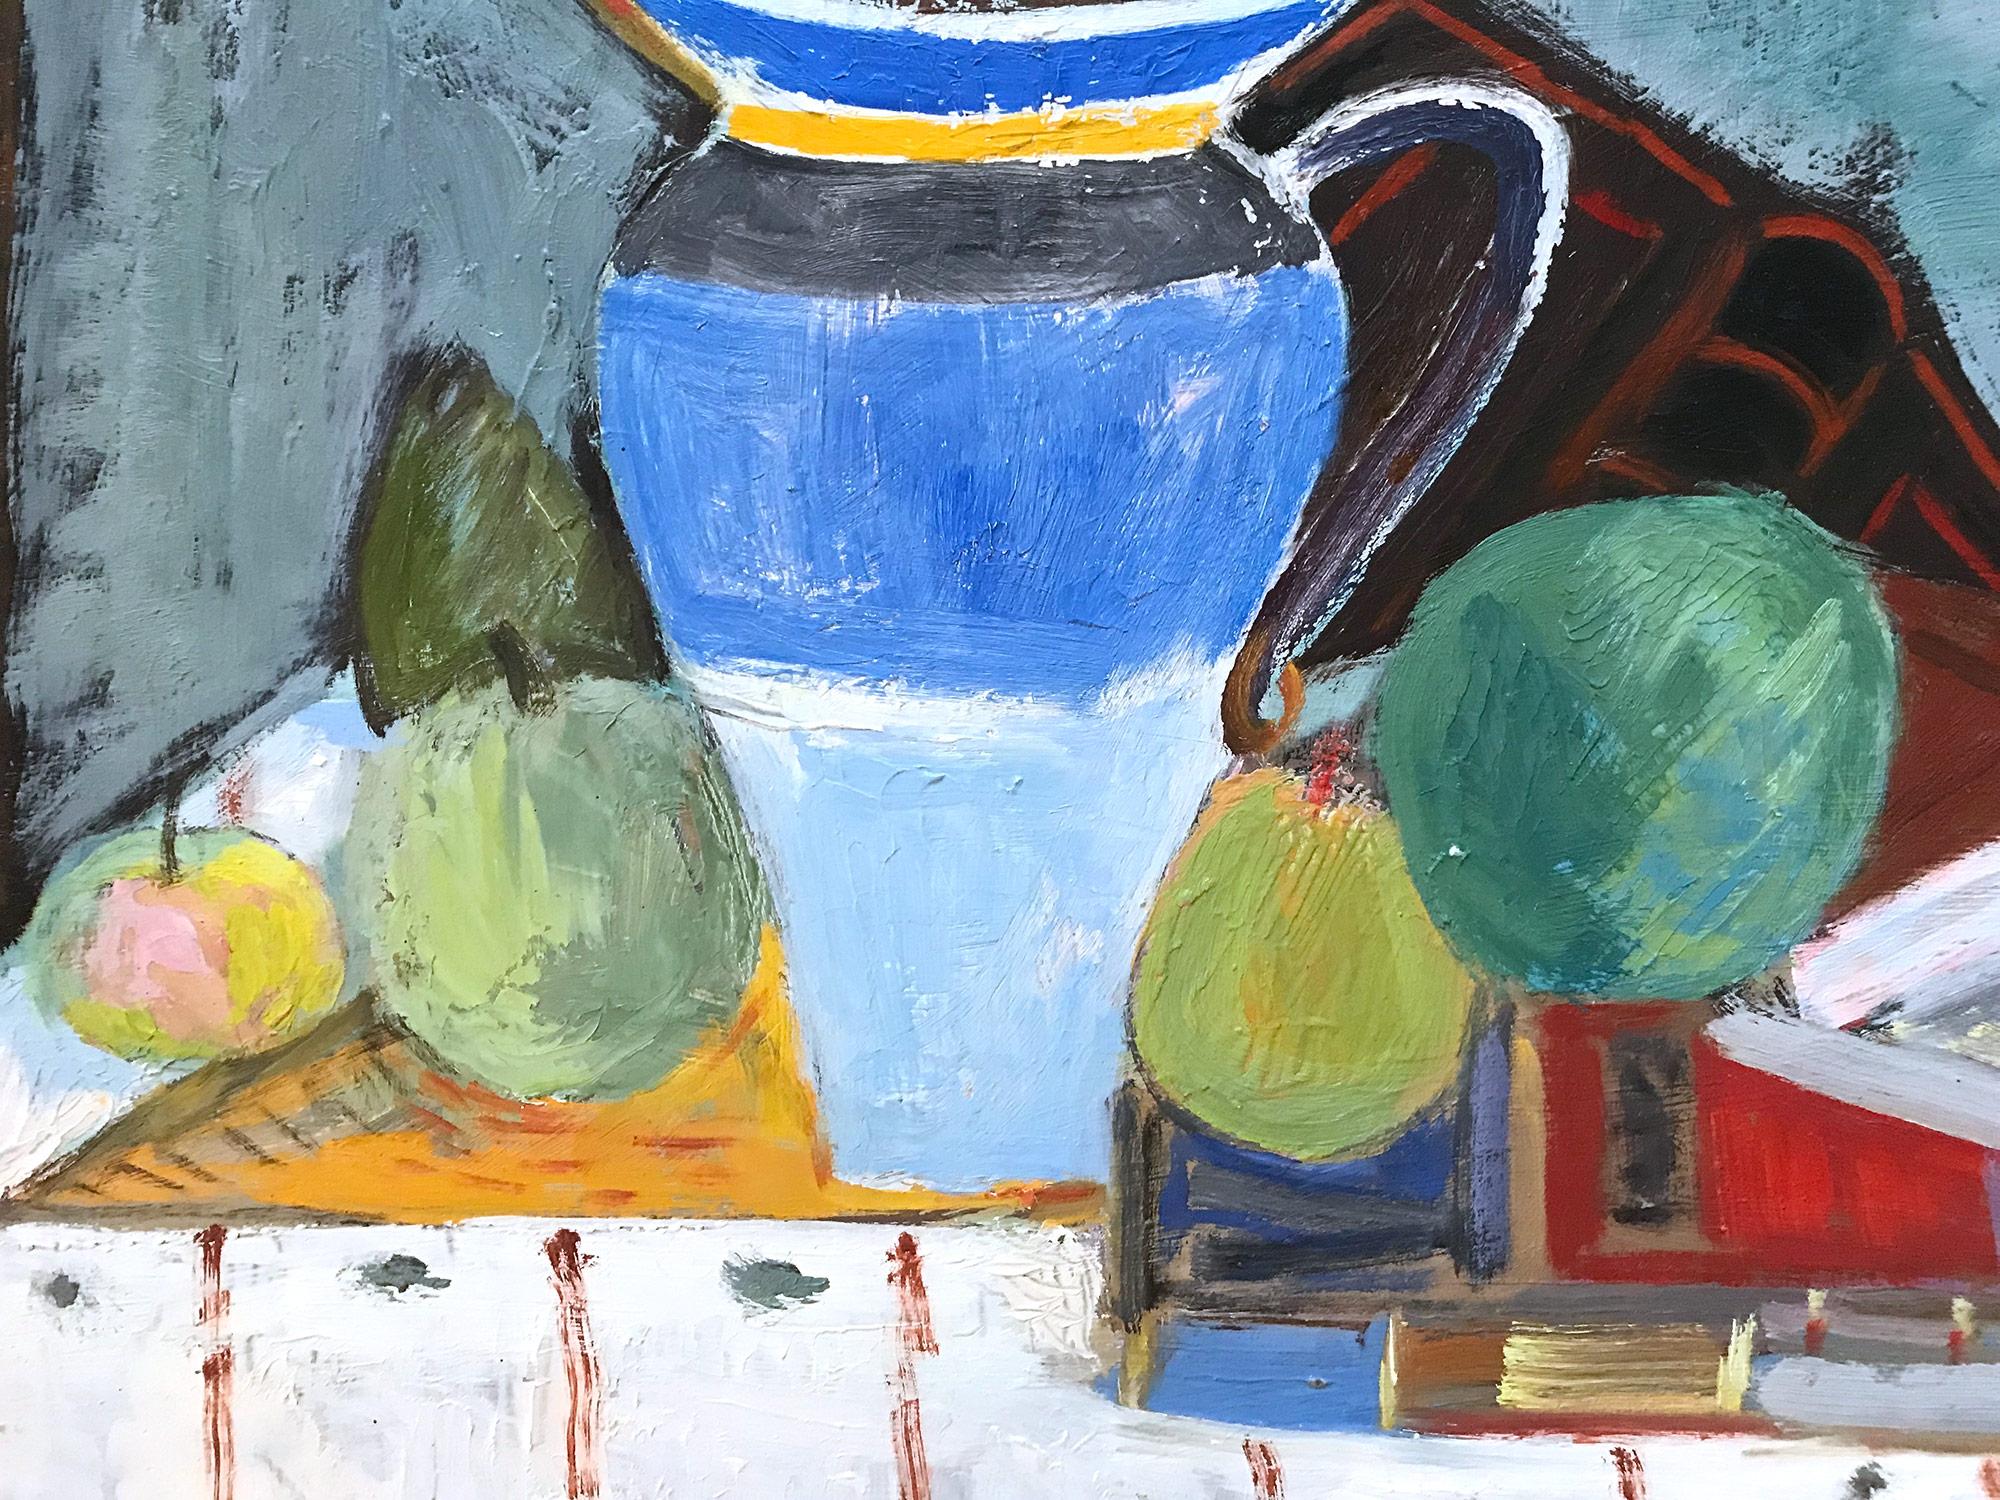 A strong modernist oil painting depicted in the mid Century by Russian painter Michael Baxte. Mostly known for his abstracted figures on canvas or street scenes, this piece is a wonderful representation of his bold still life paintings, with